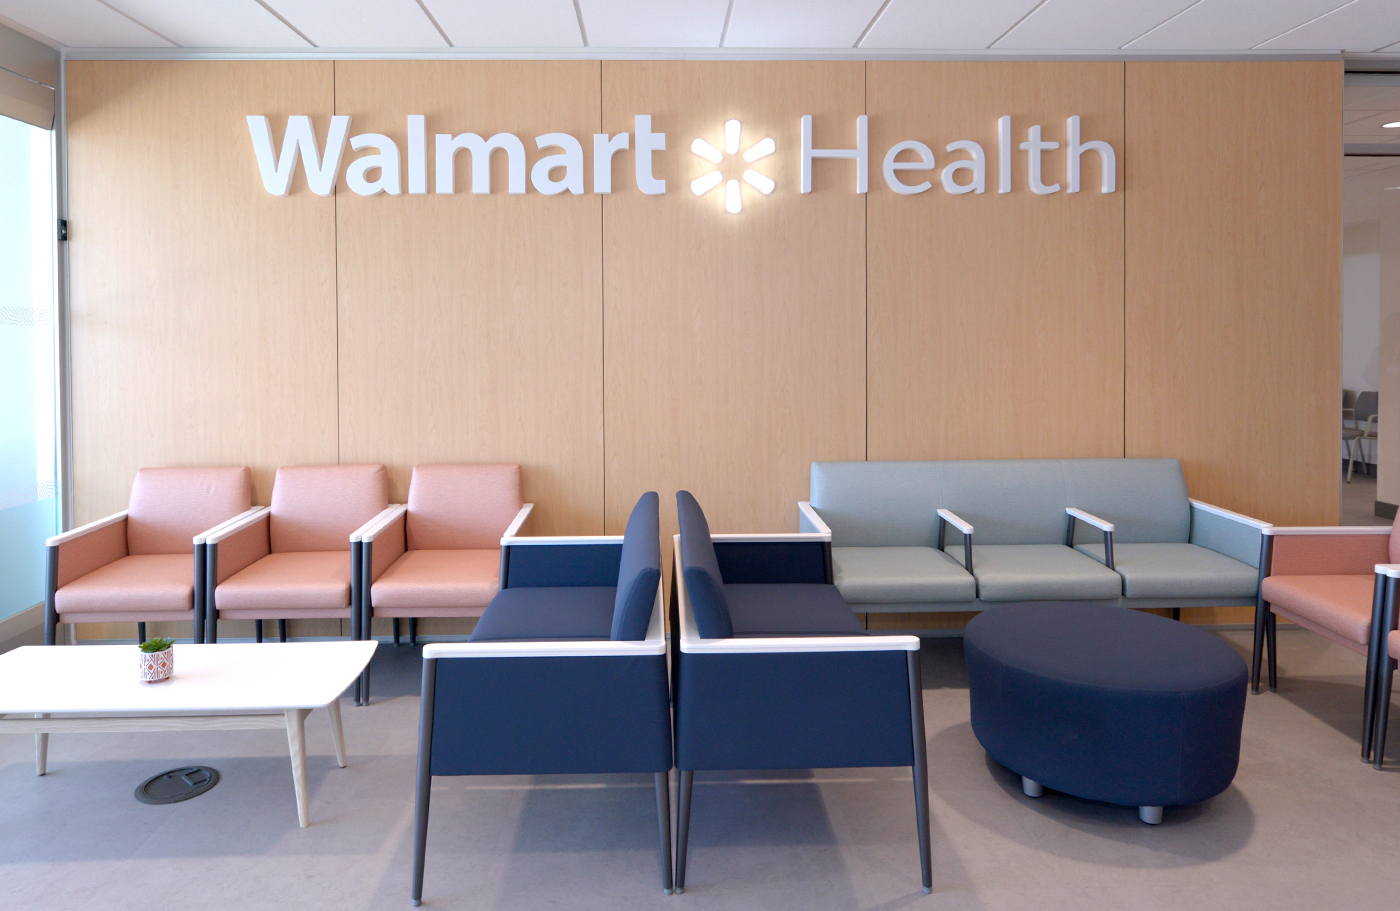 Walmart Health centers will offer care seven days a week, offering it via telehealth on Sundays: